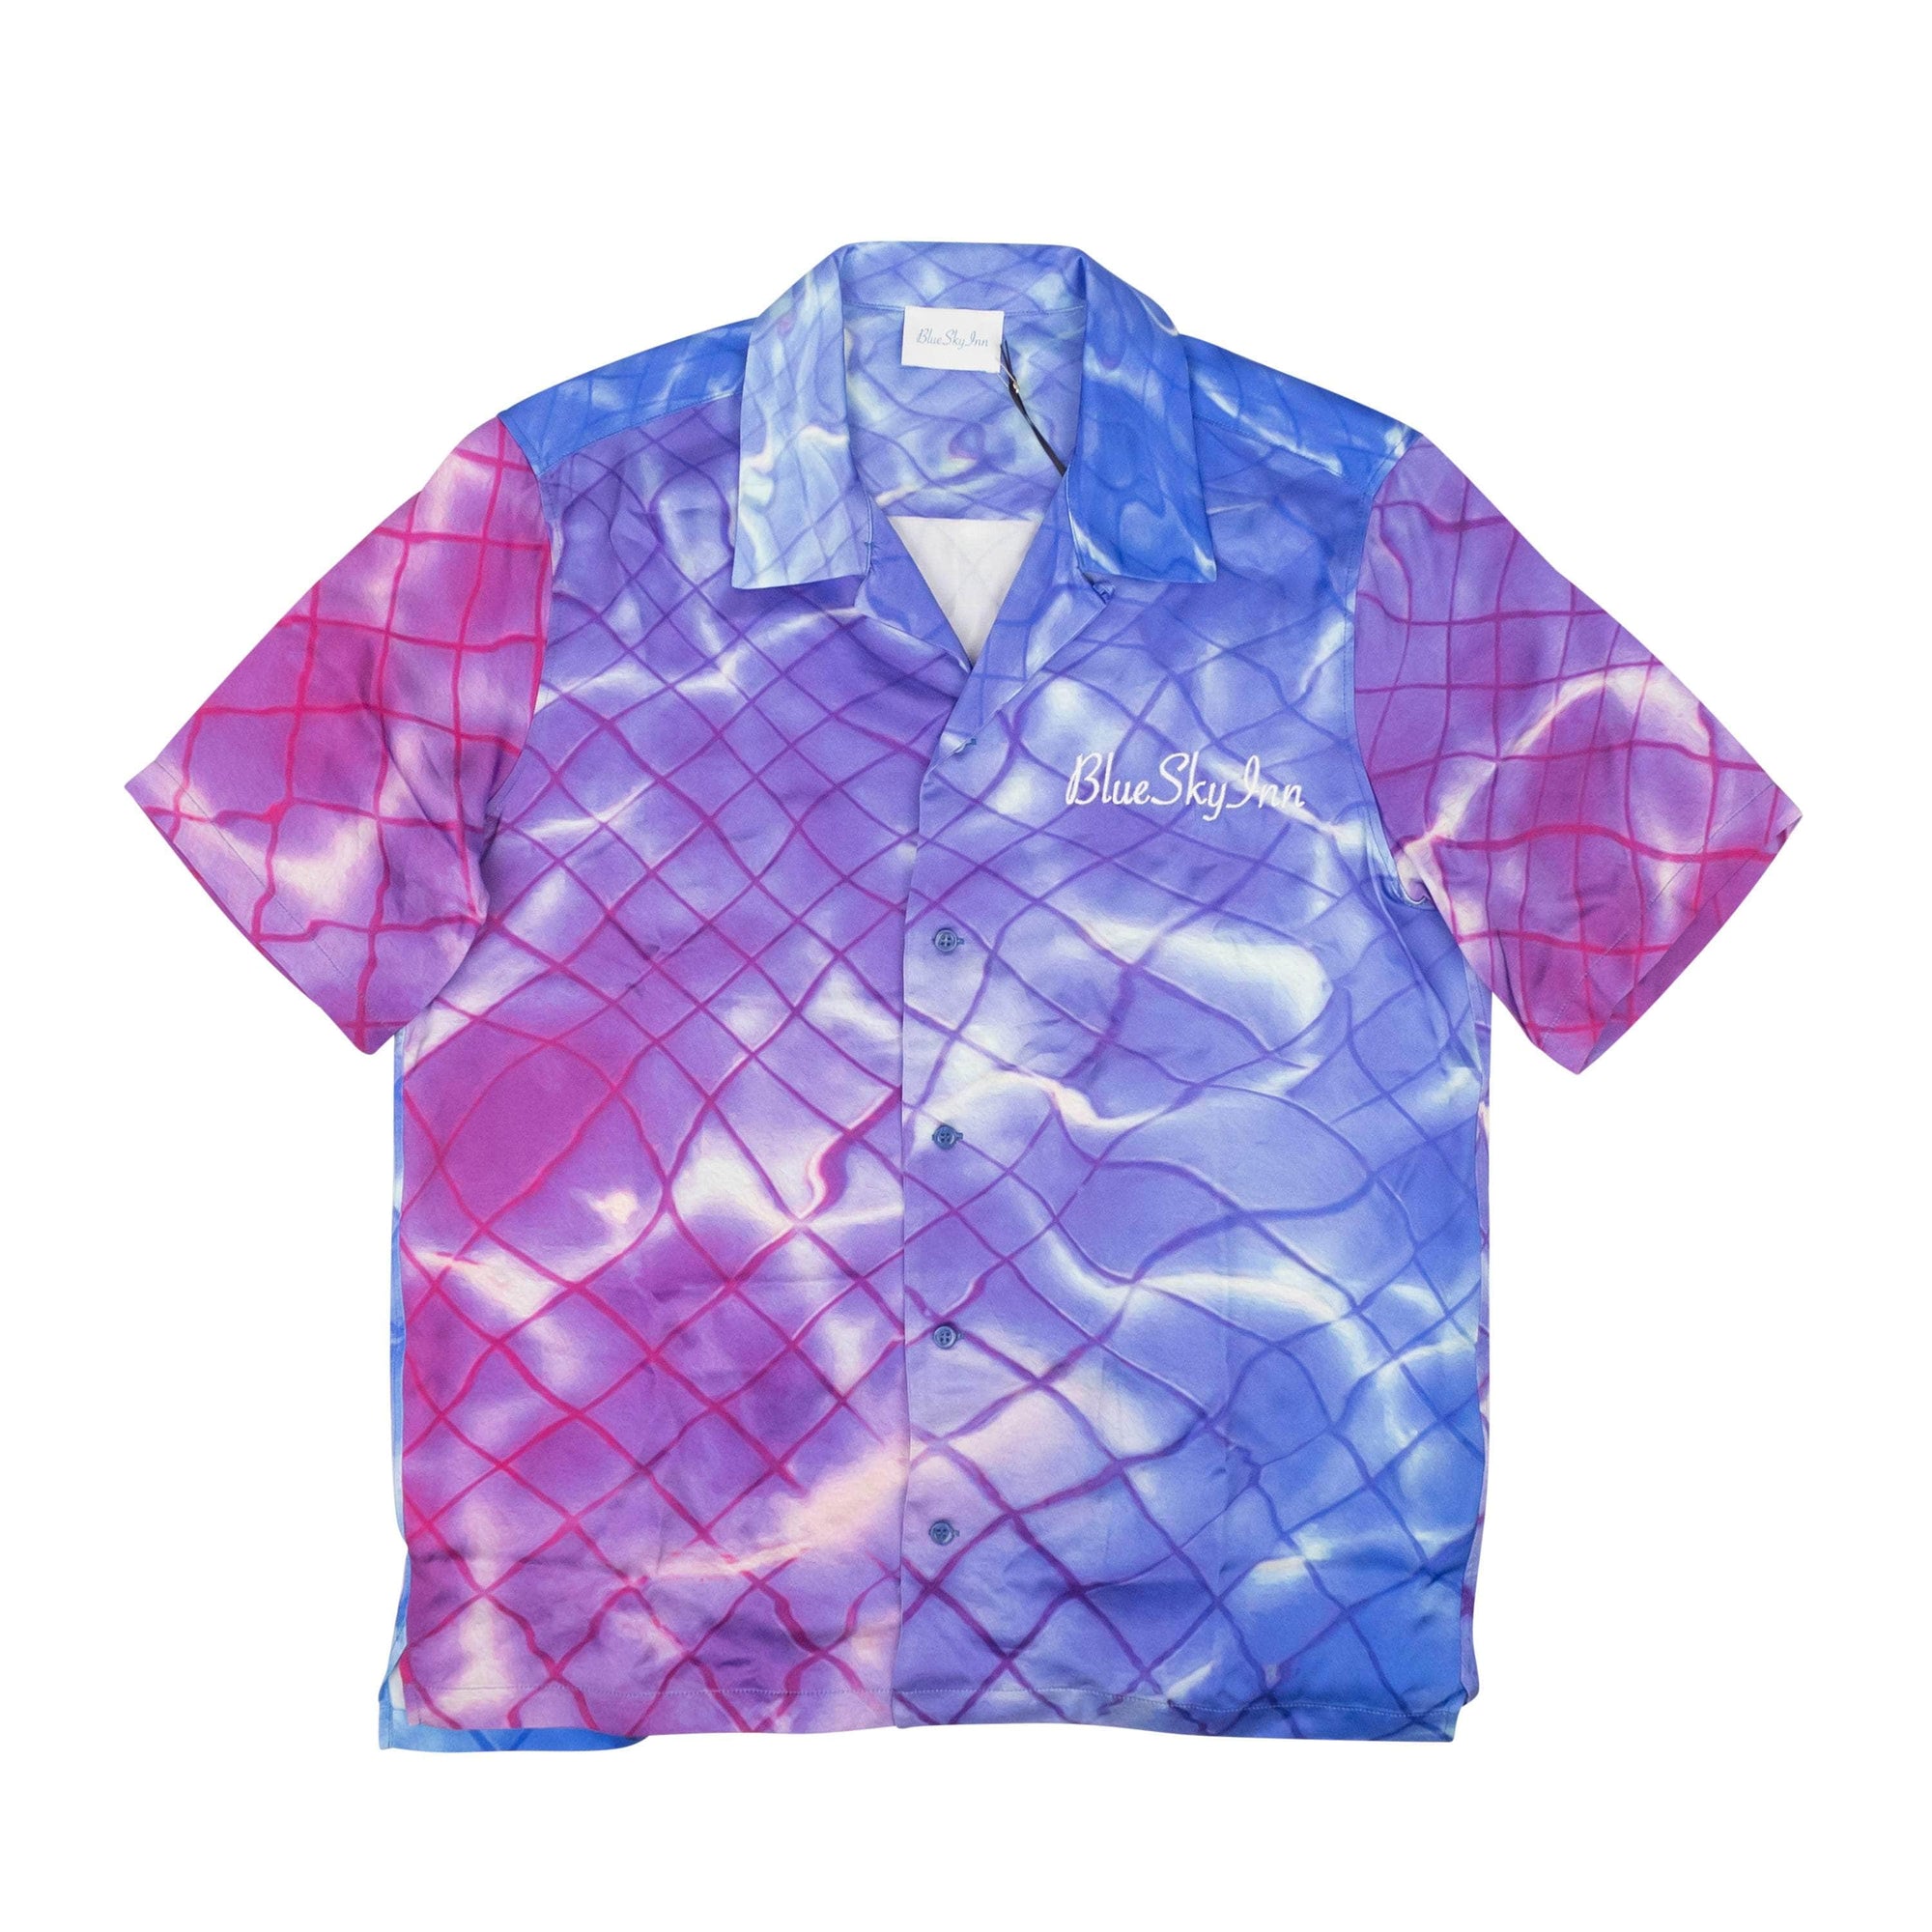 Blue Sky Inn blue-sky-inn, channelenable-all, chicmi, couponcollection, gender-mens, main-clothing, mens-shoes, size-l, size-m, size-s, under-250 Blue And Purple Pool Print Button Down Shirt